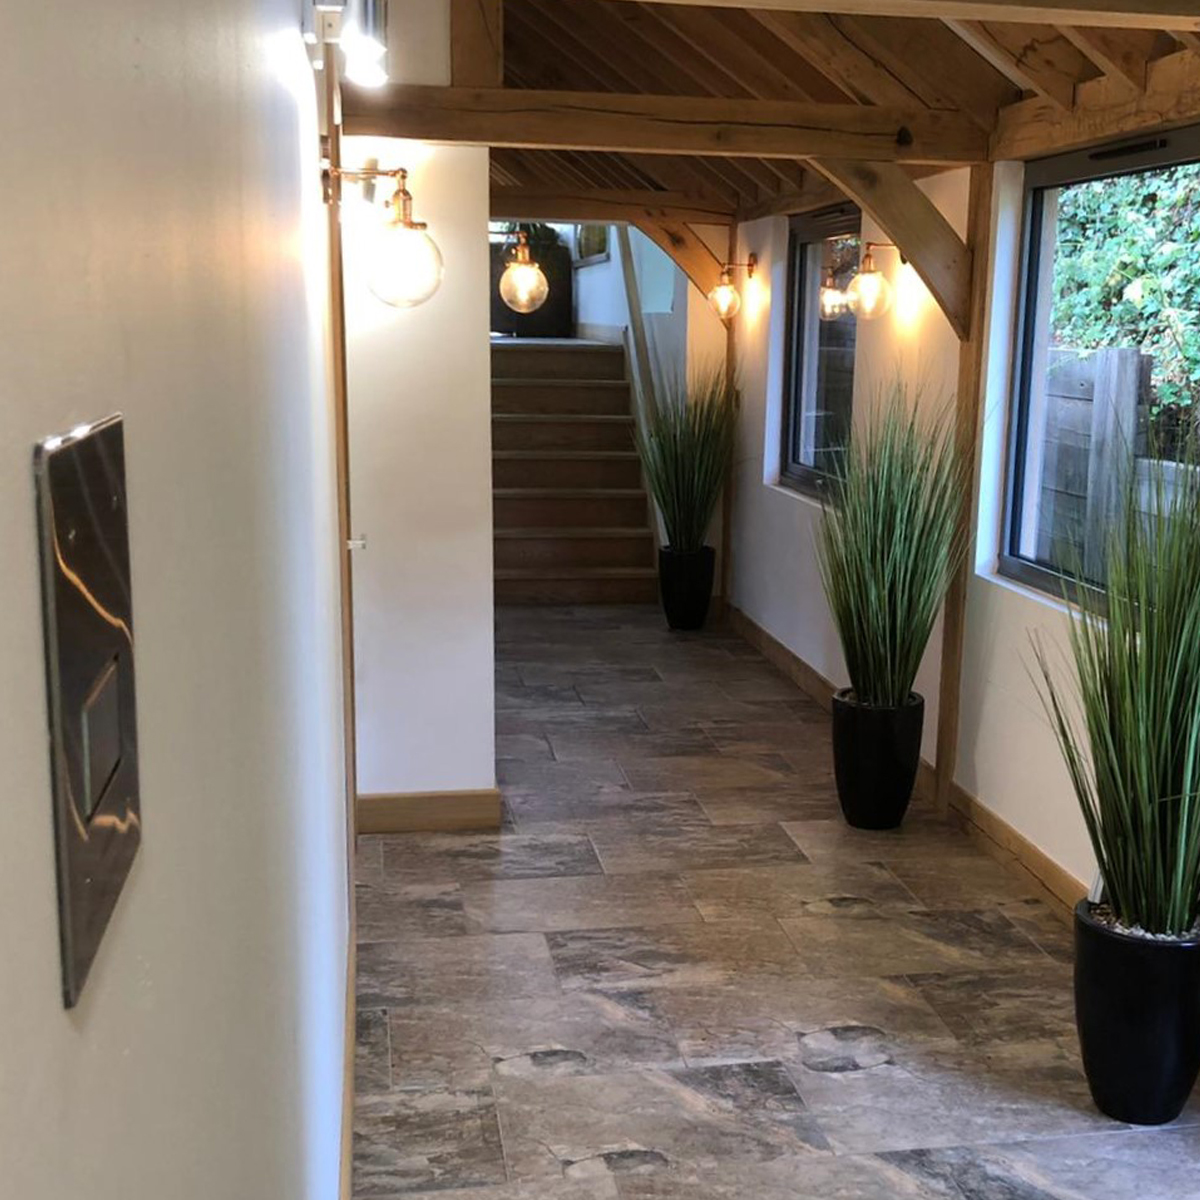 Automist protects hallway in award-winning property